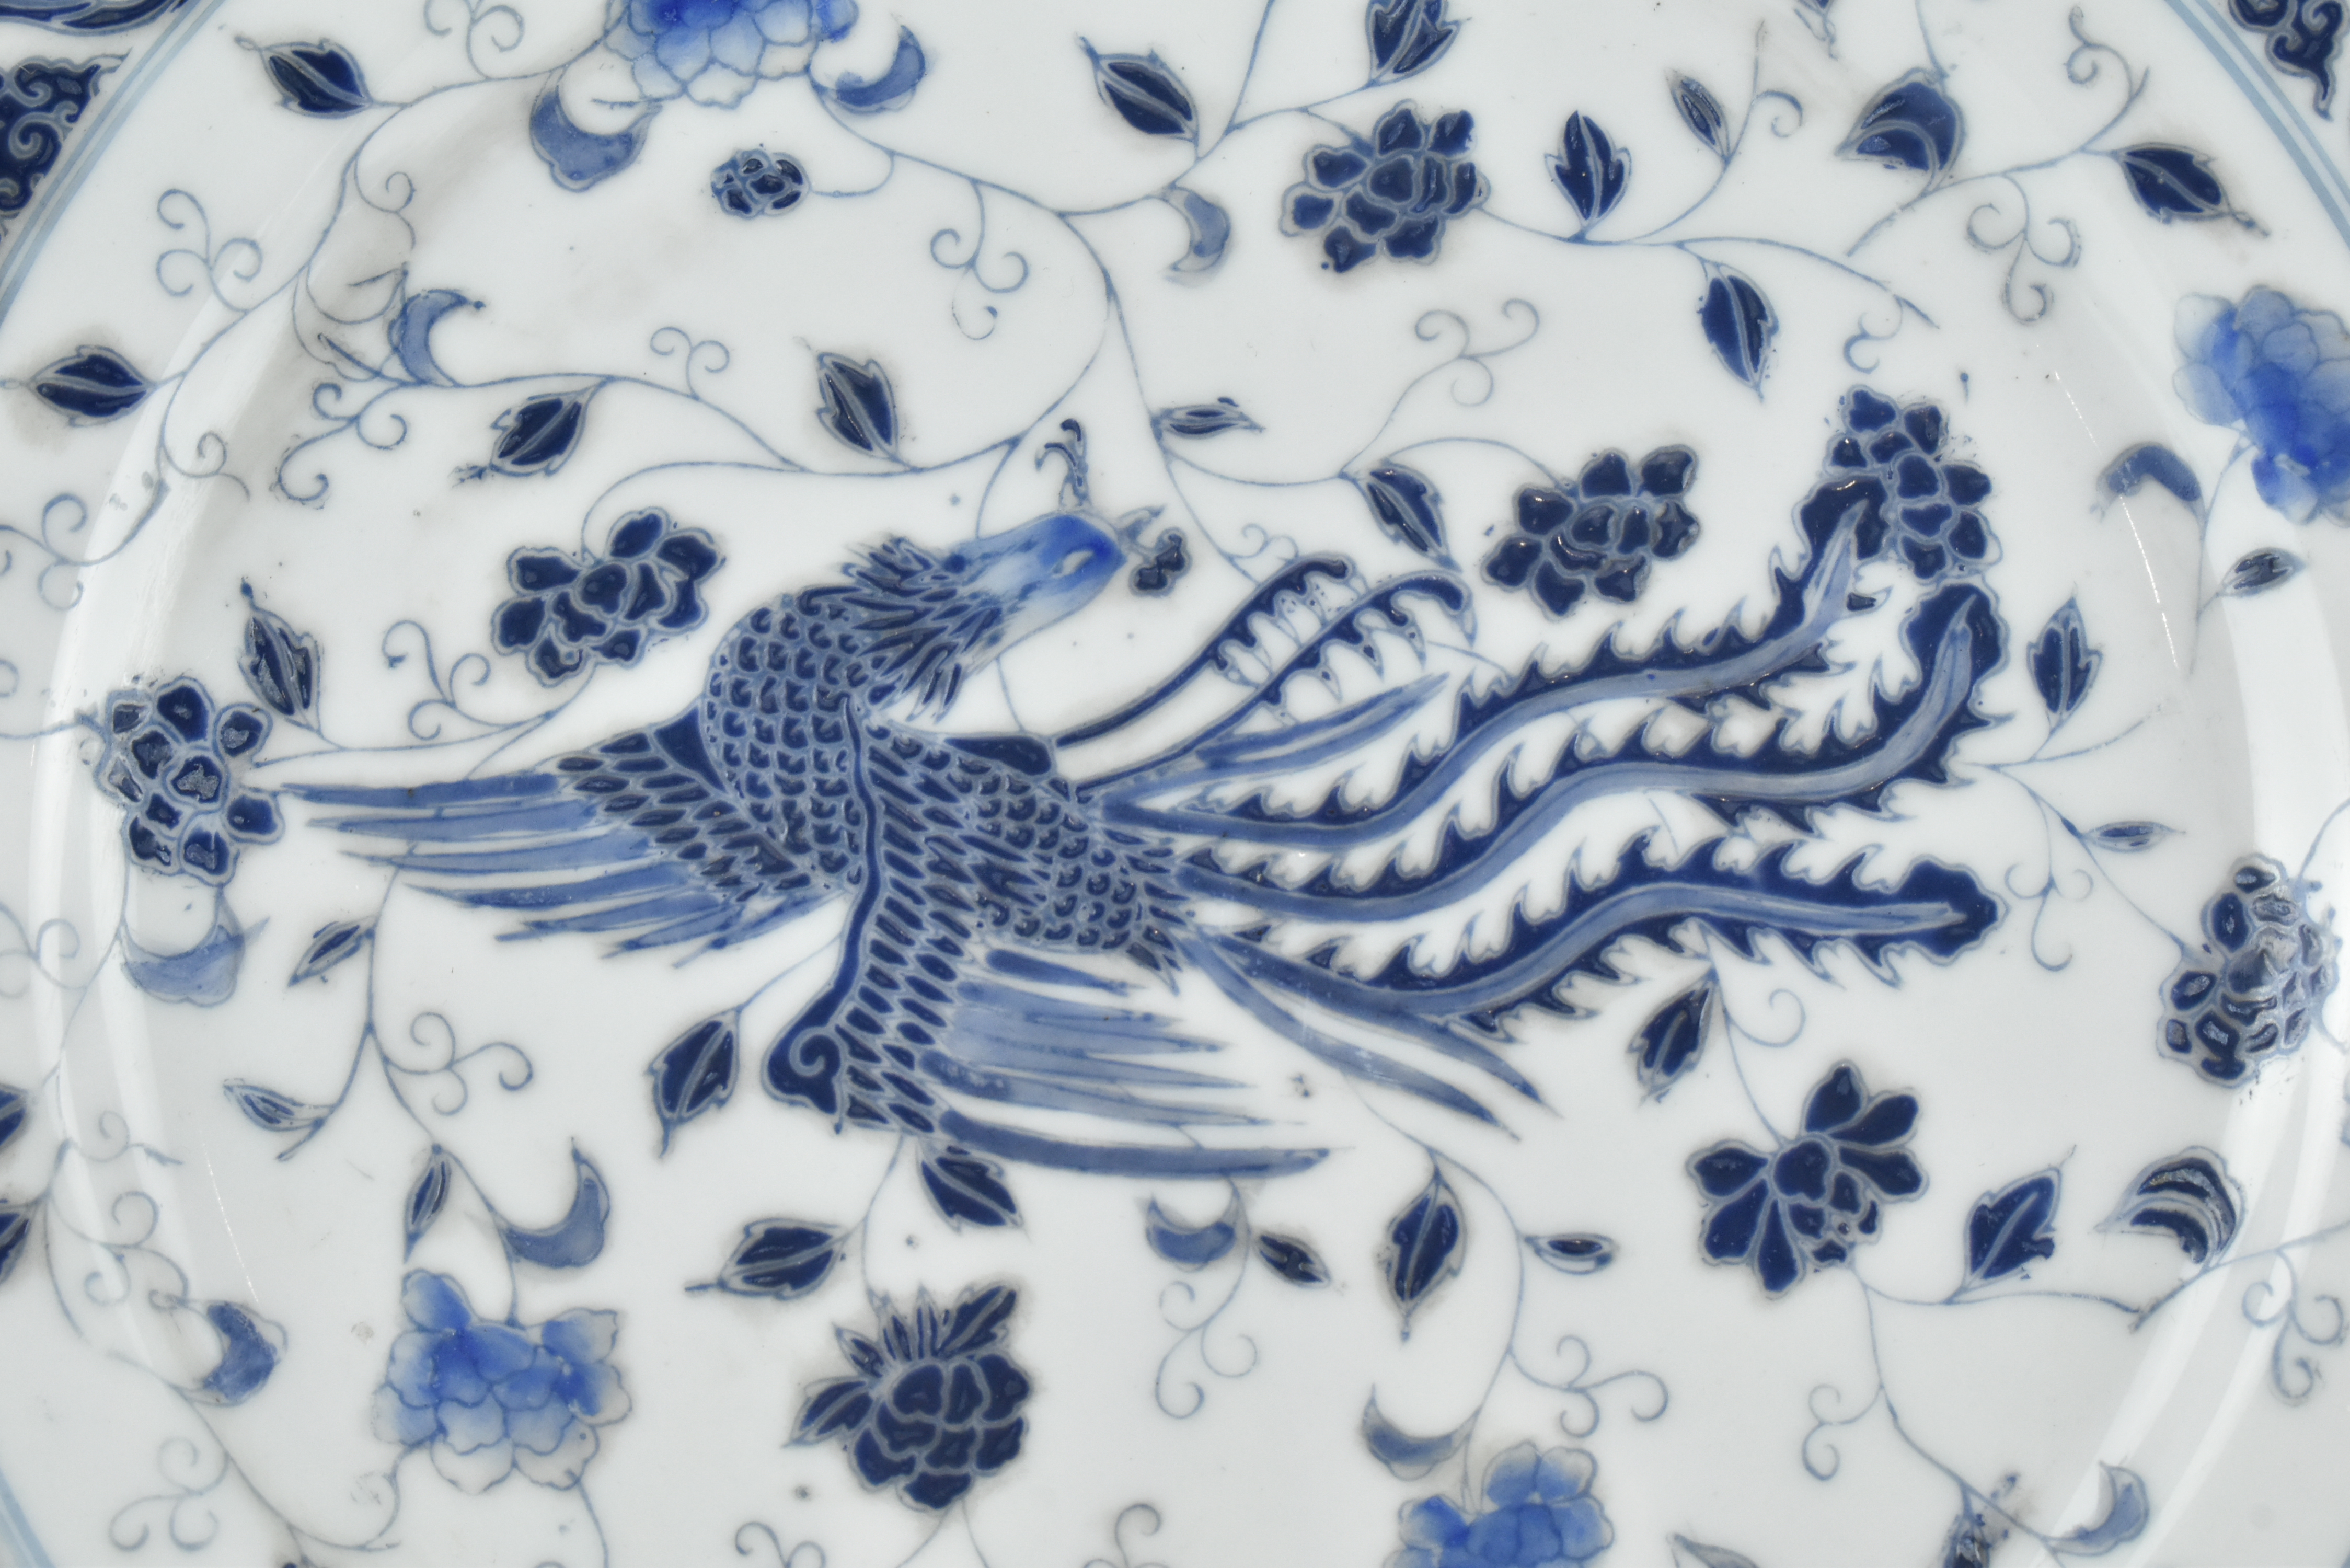 PAIR OF BLUE AND WHITE PHOENIX CHARGERS 晚清牡丹凤凰盘一对 - Image 3 of 6